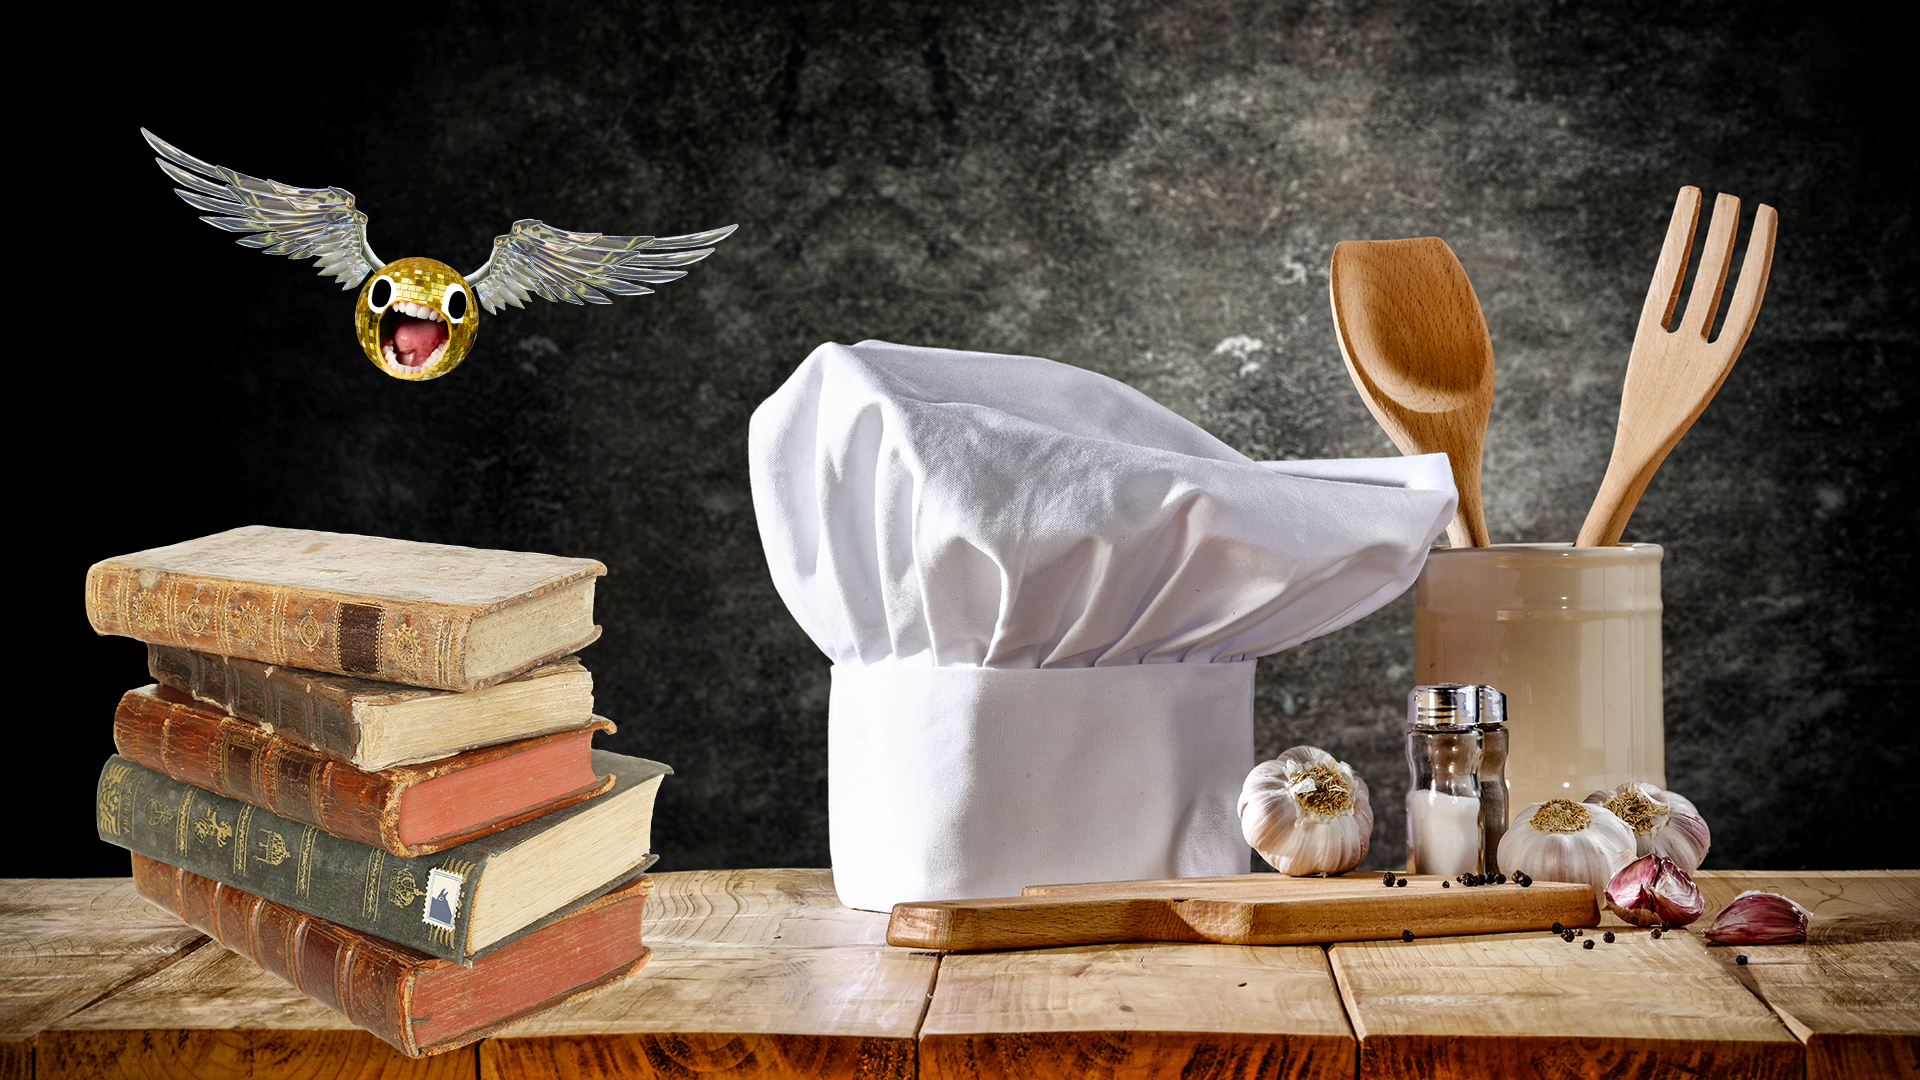 A pile of dusty books, cooking utensils, a Golden Snitch and a chef's hat